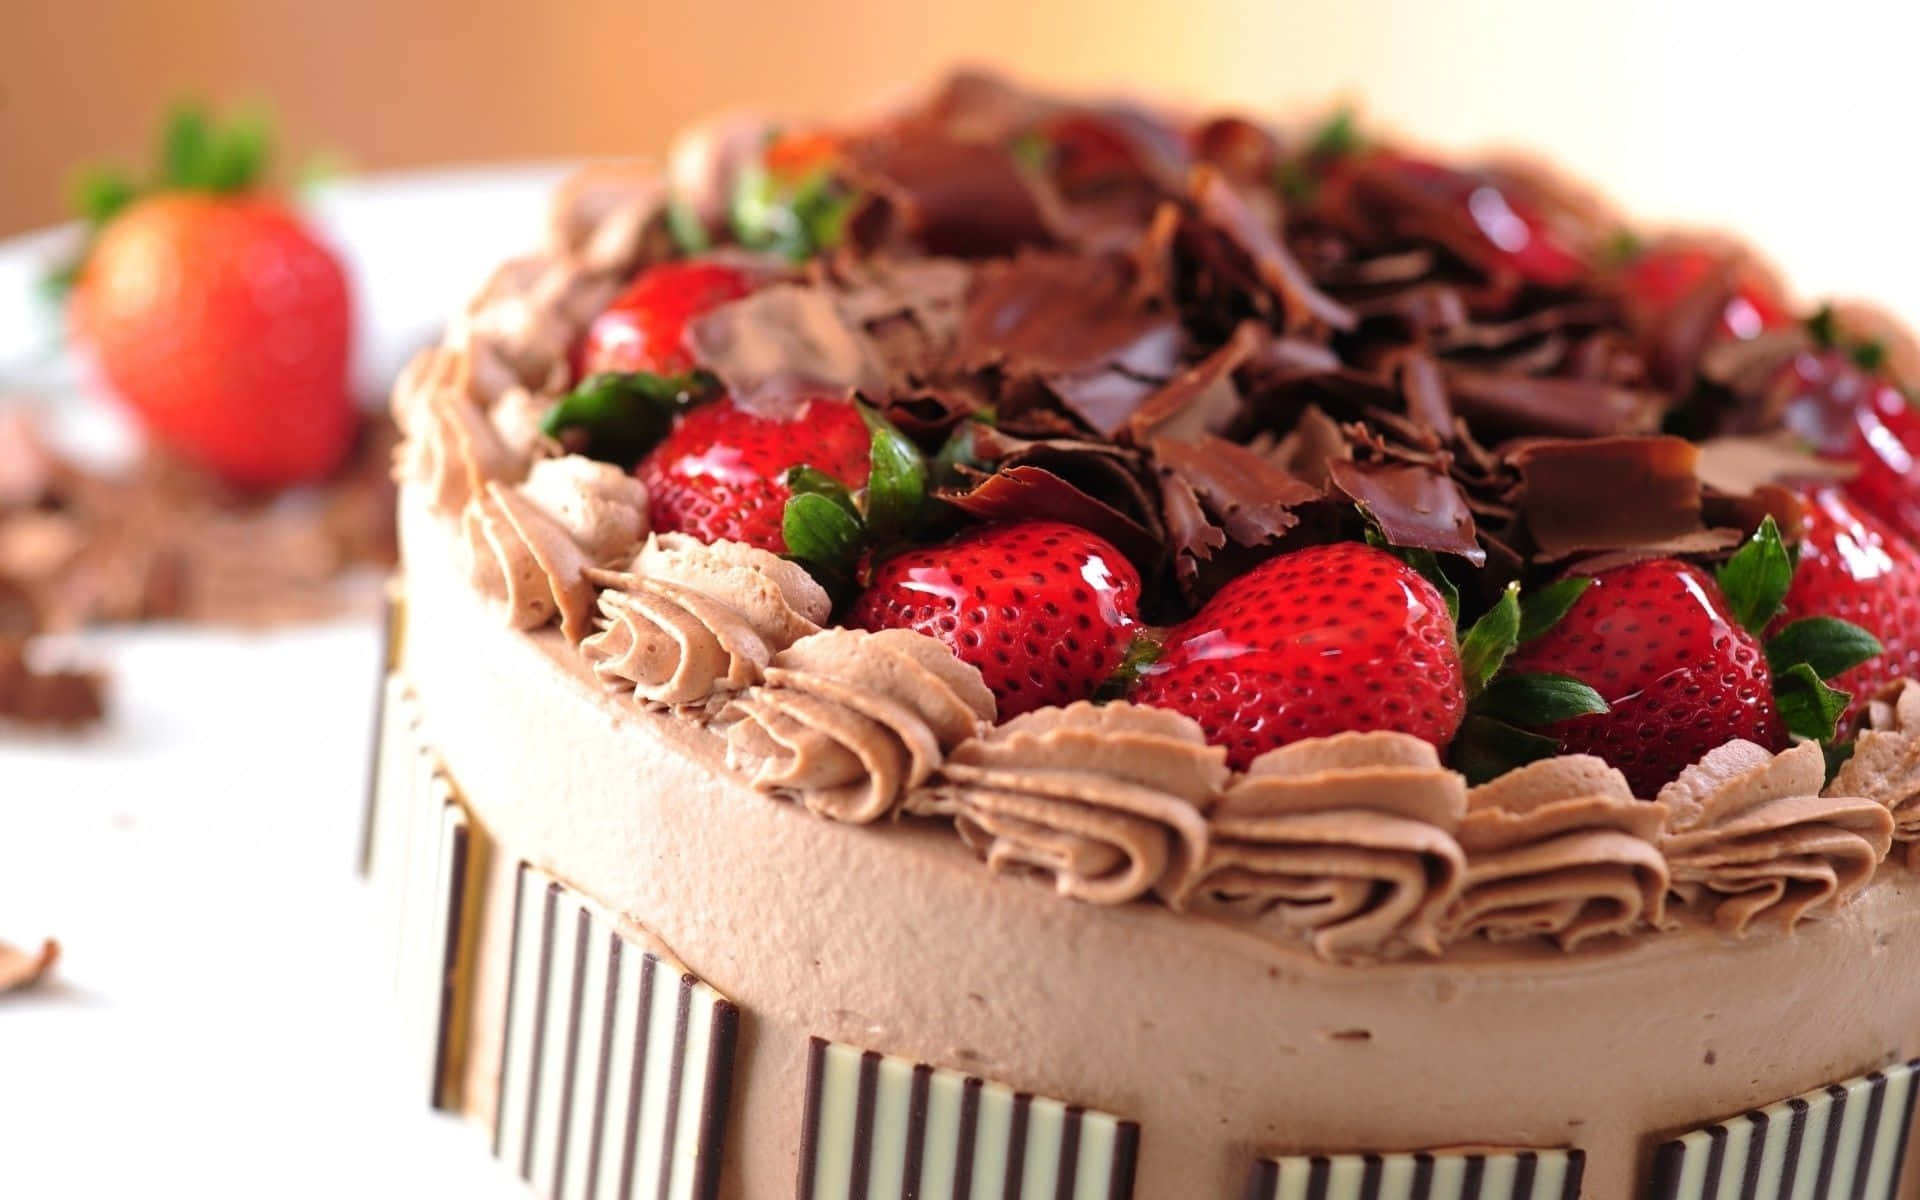 Chocolate Cake With Strawberries And Chocolate Frosting